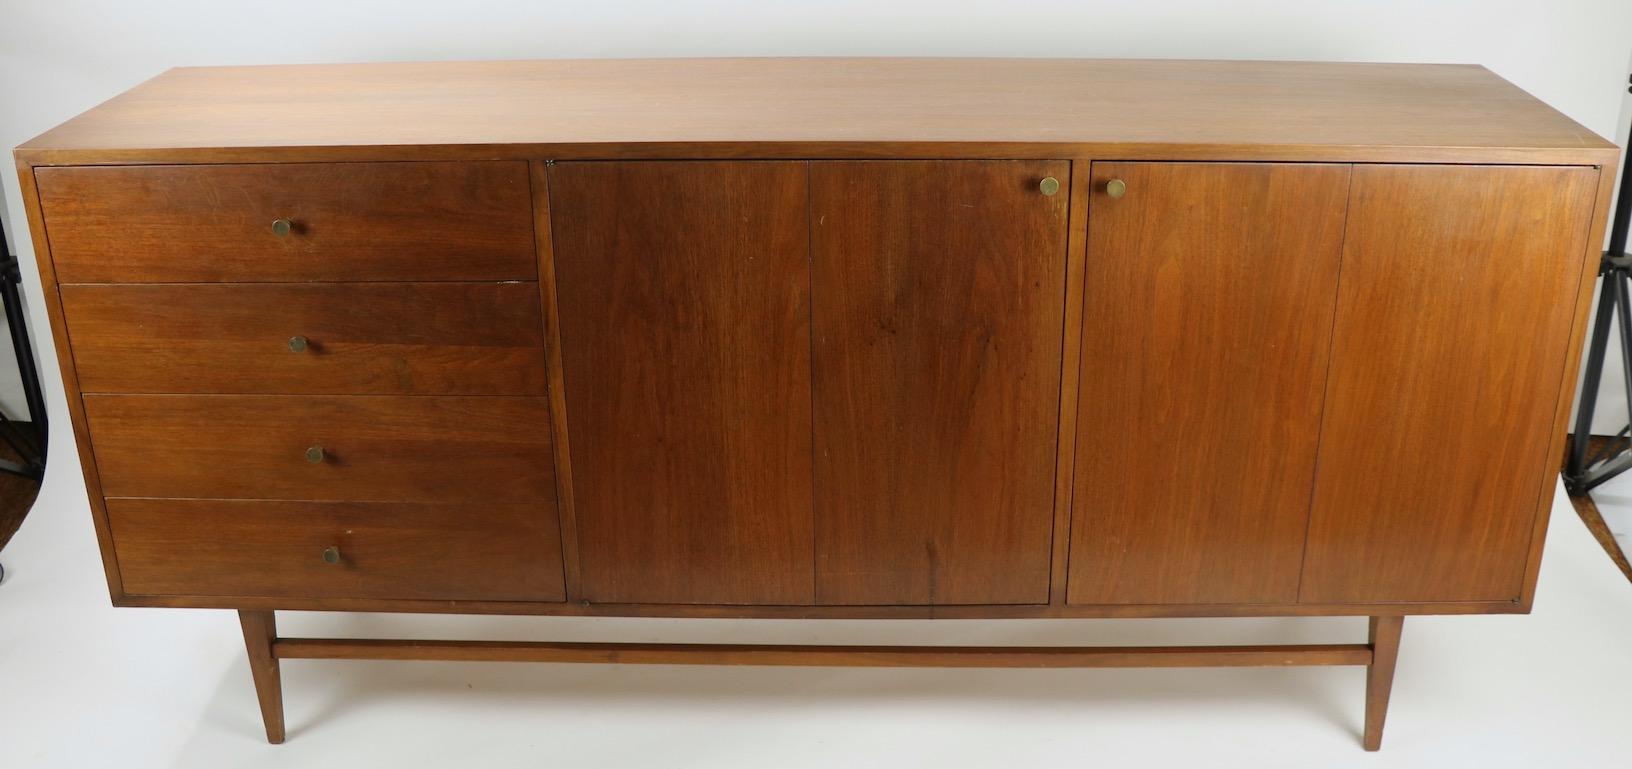 Nice Mid-Century Modern credenza having a large cabinet bottom and a tall vertical display shelf top element. The shelf has its original white glass insert surfaces and four thin drawers The bottom features four drawers on one side, the top drawer